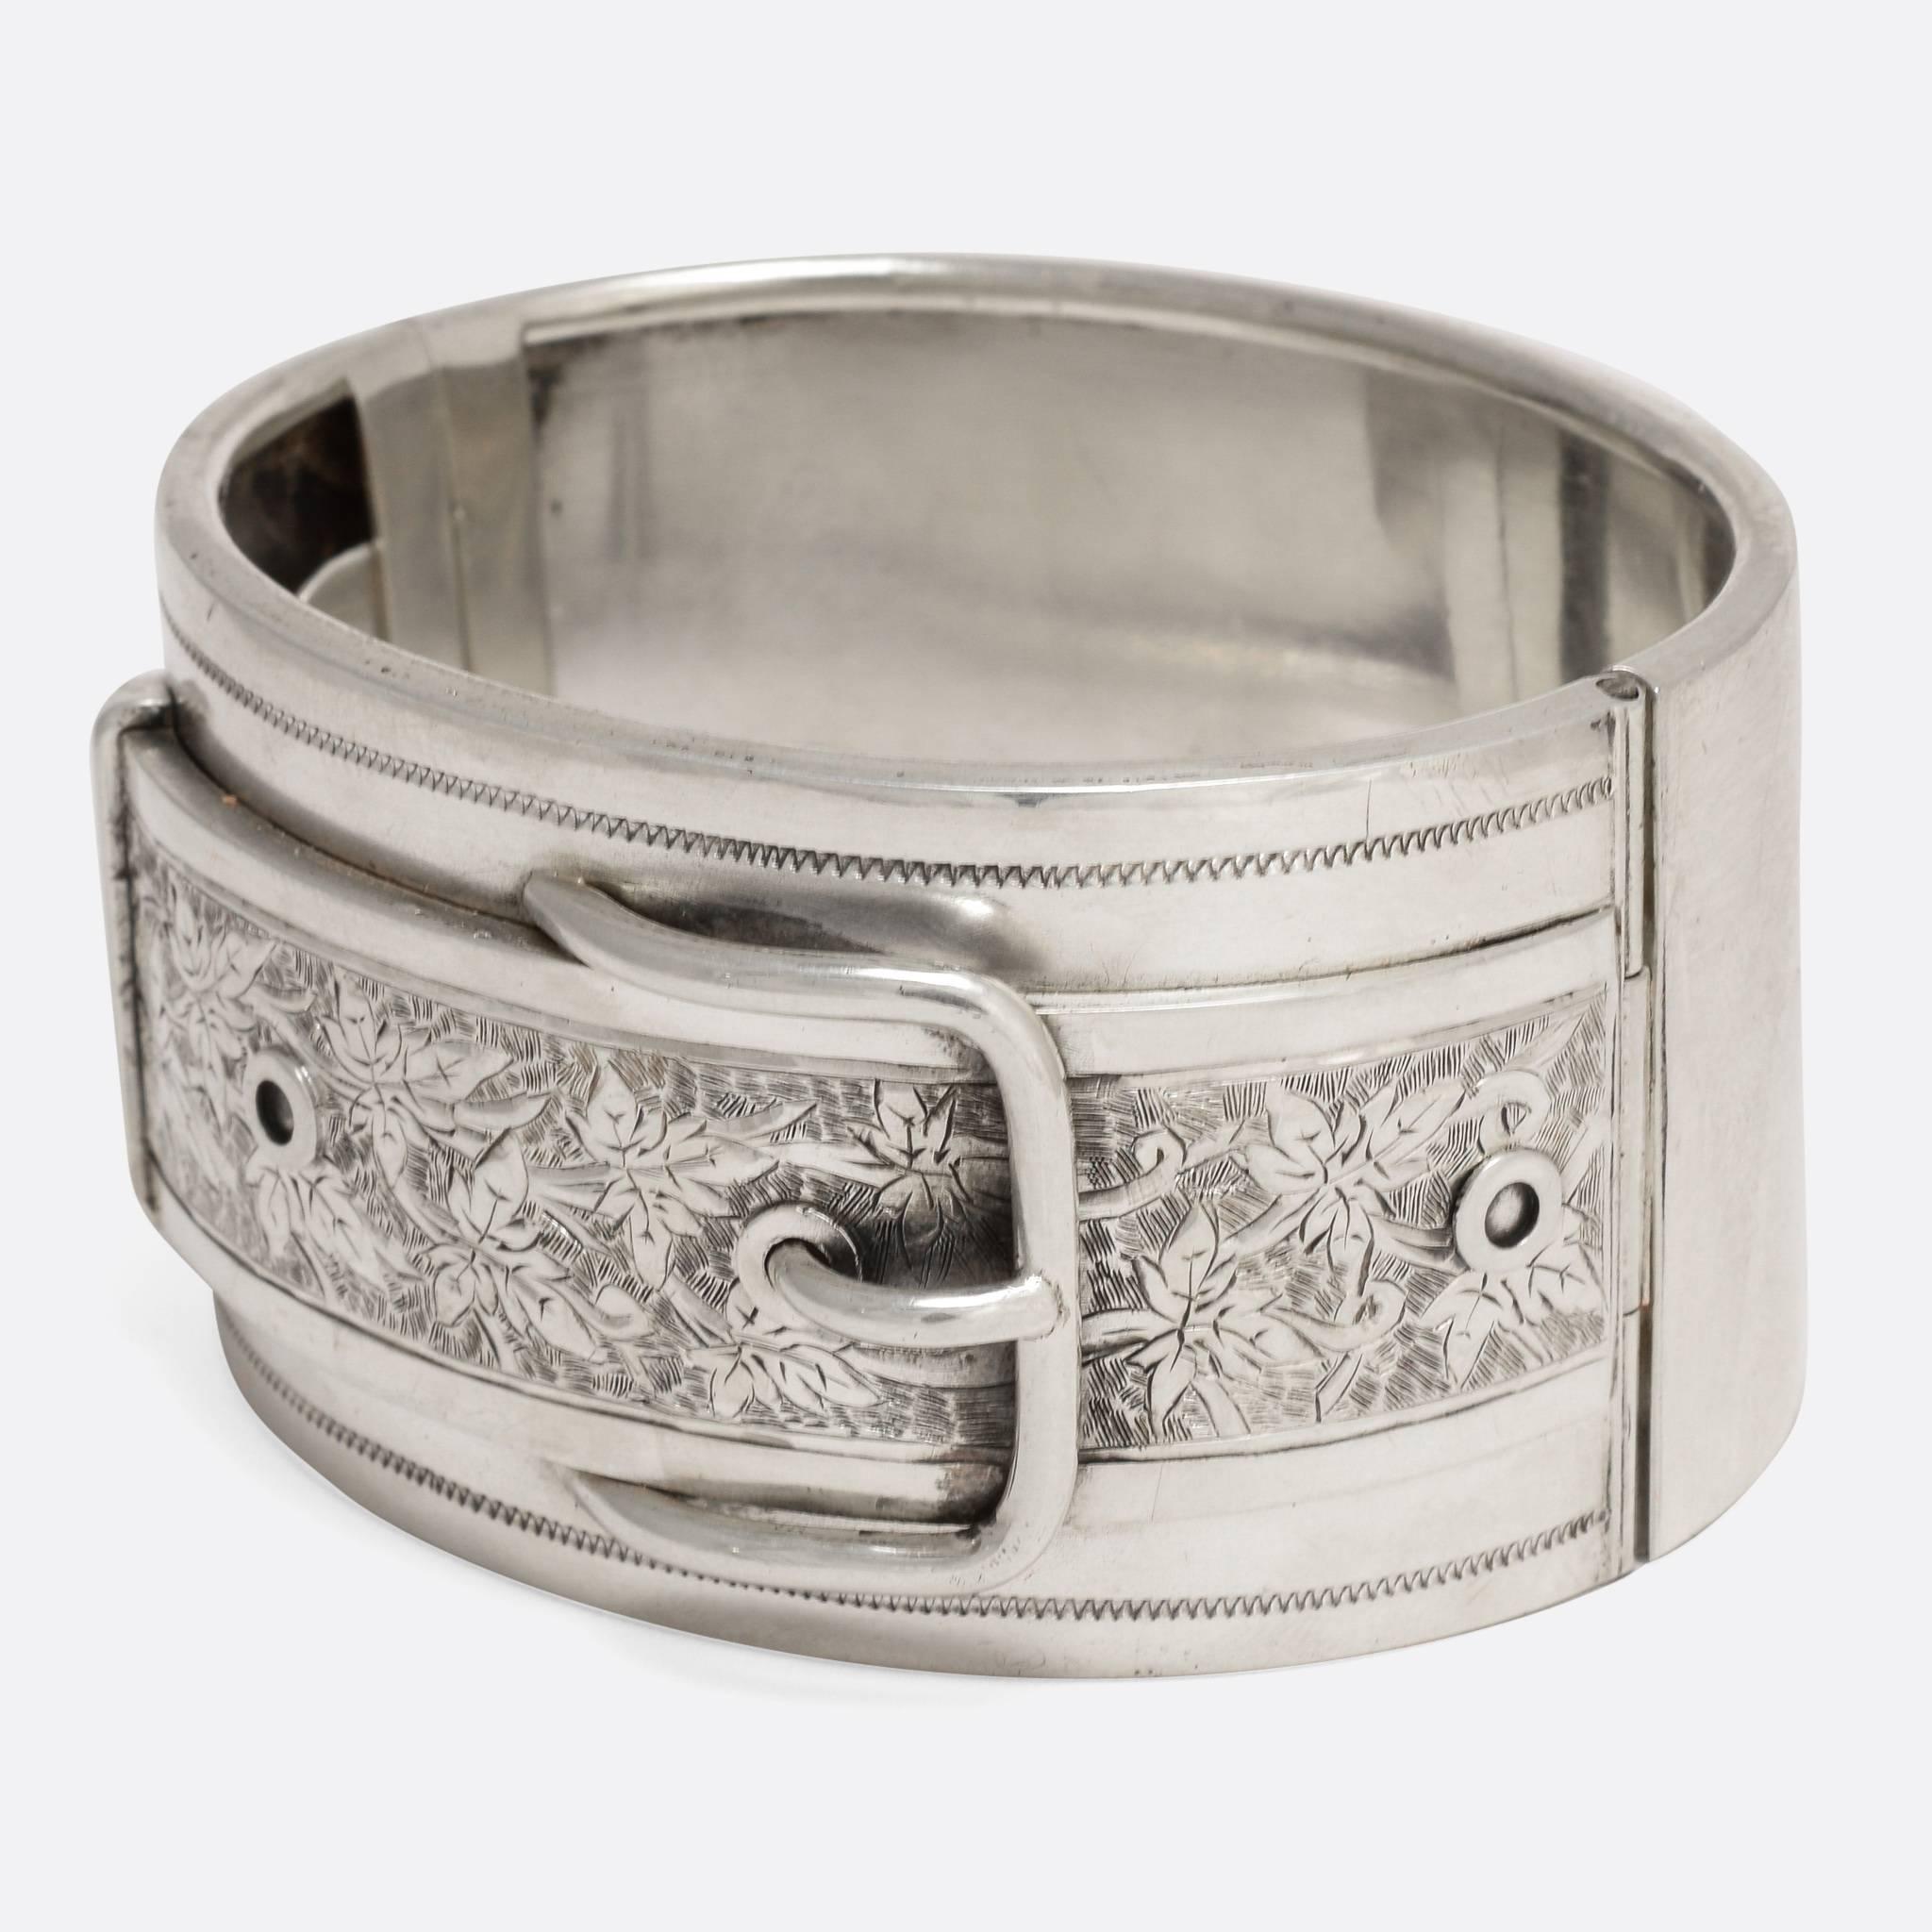 This stylish antique bangle features a Belt Buckle design, finished with fine hand-chased detailing with Ivy Leaf motifs. Both the buckle and the ivy leaf are classic examples of Victorian sentimental symbolism - where certain motifs were known to